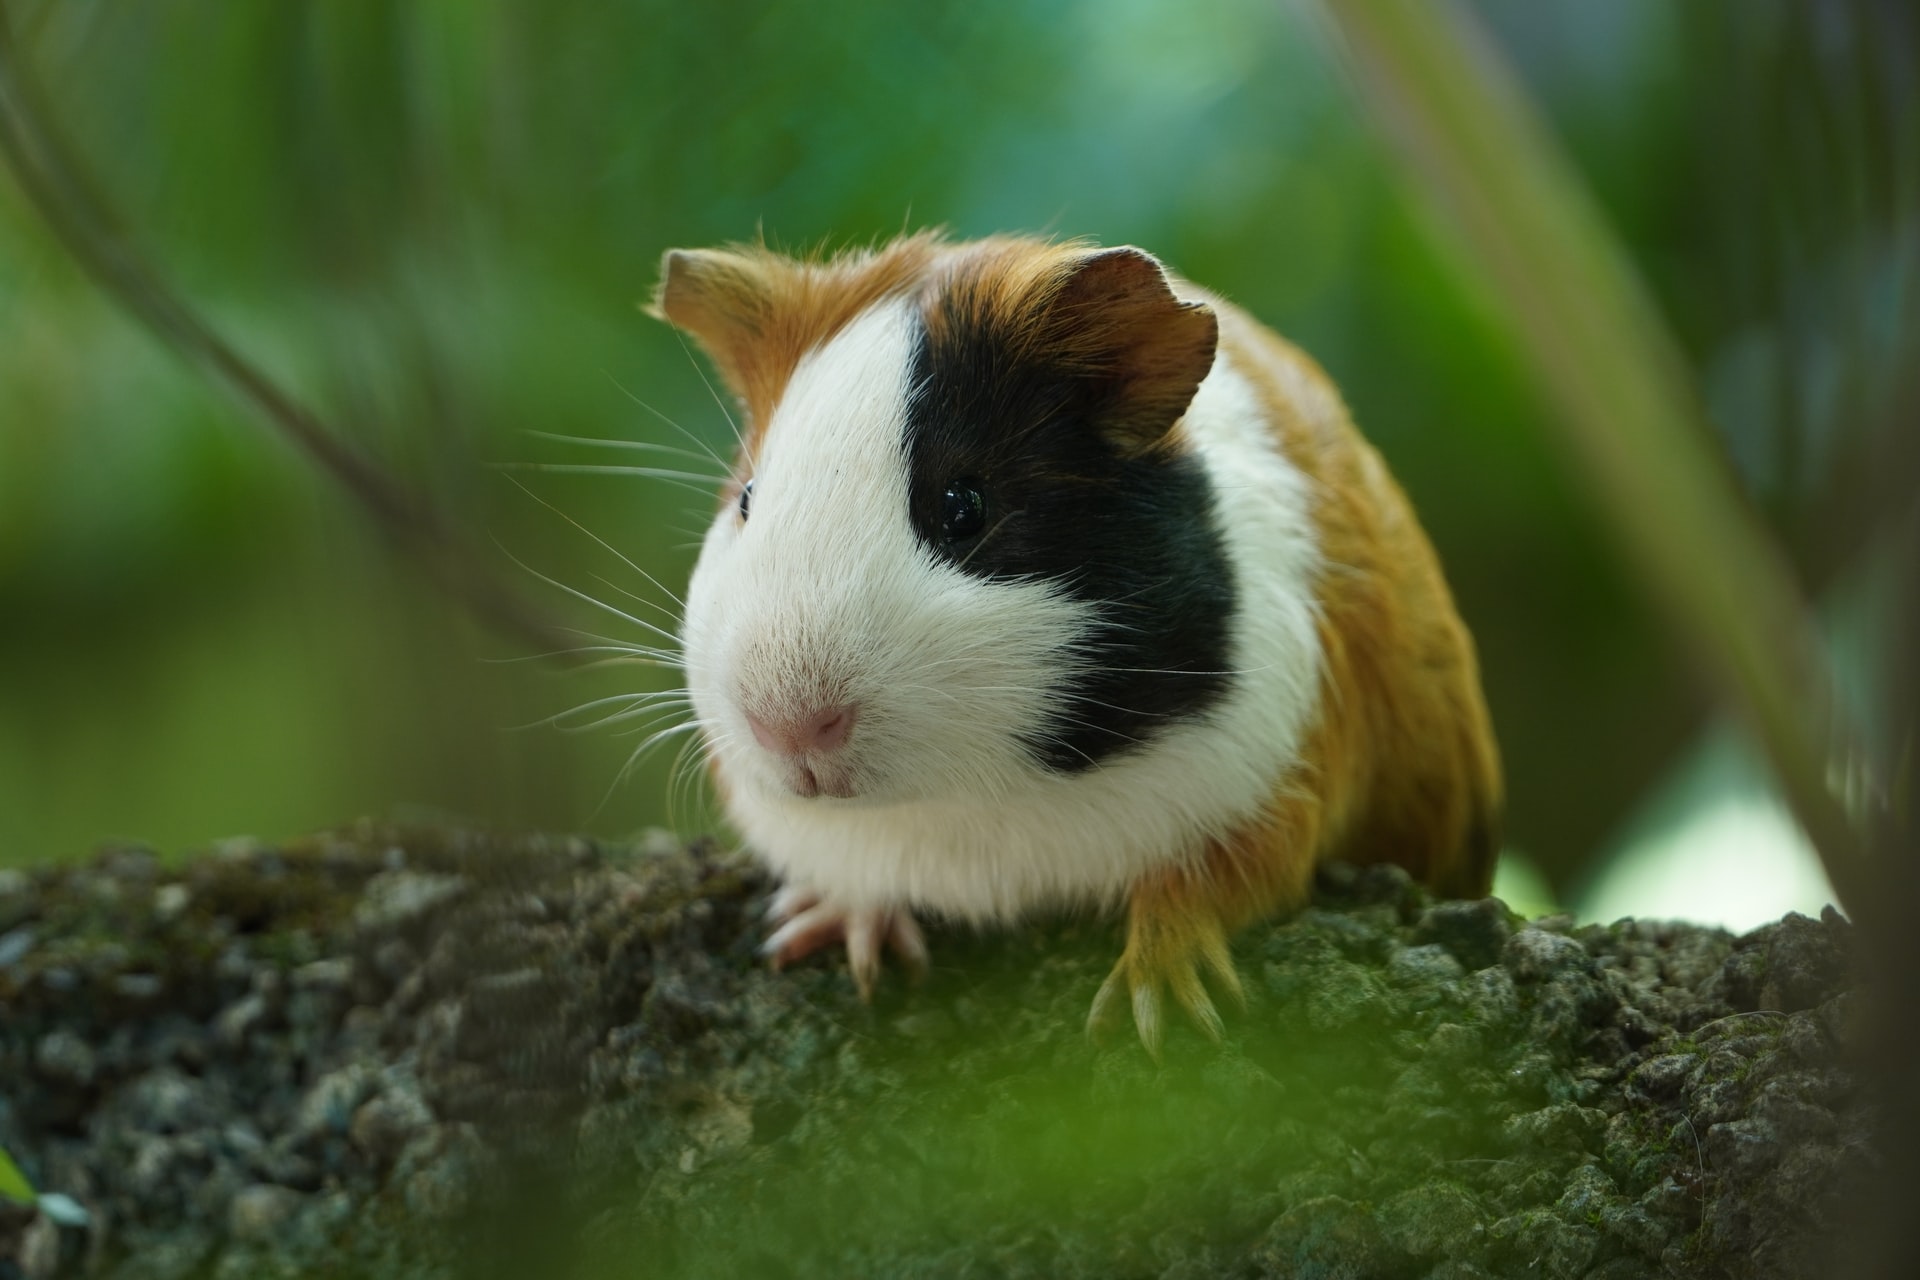 Domesticated guinea pigs can not survive in the wild